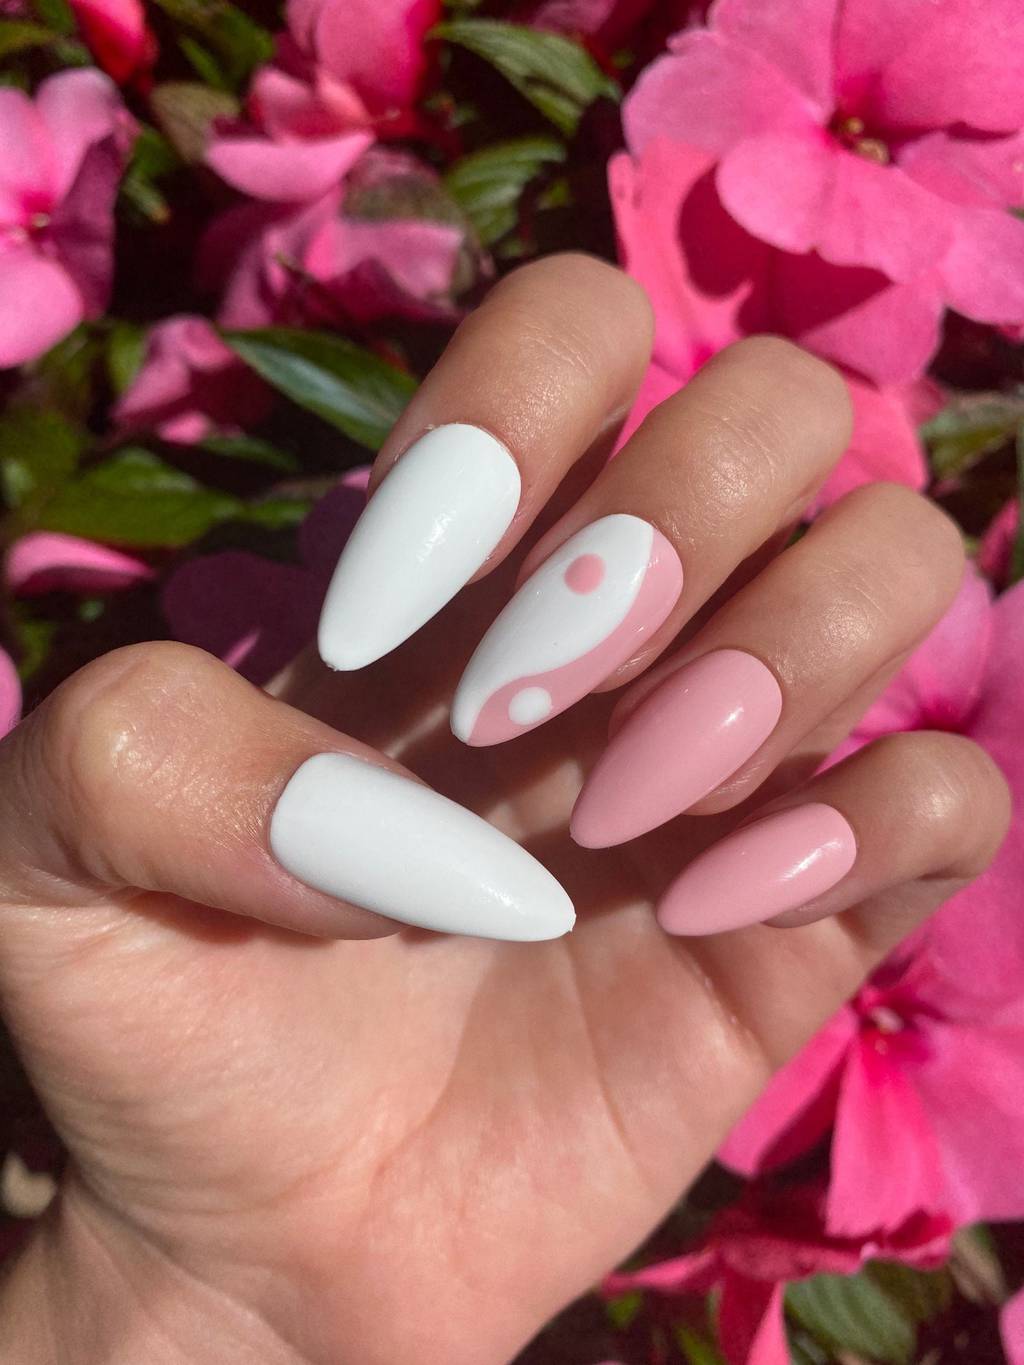 Pin on Pink Nails Designs